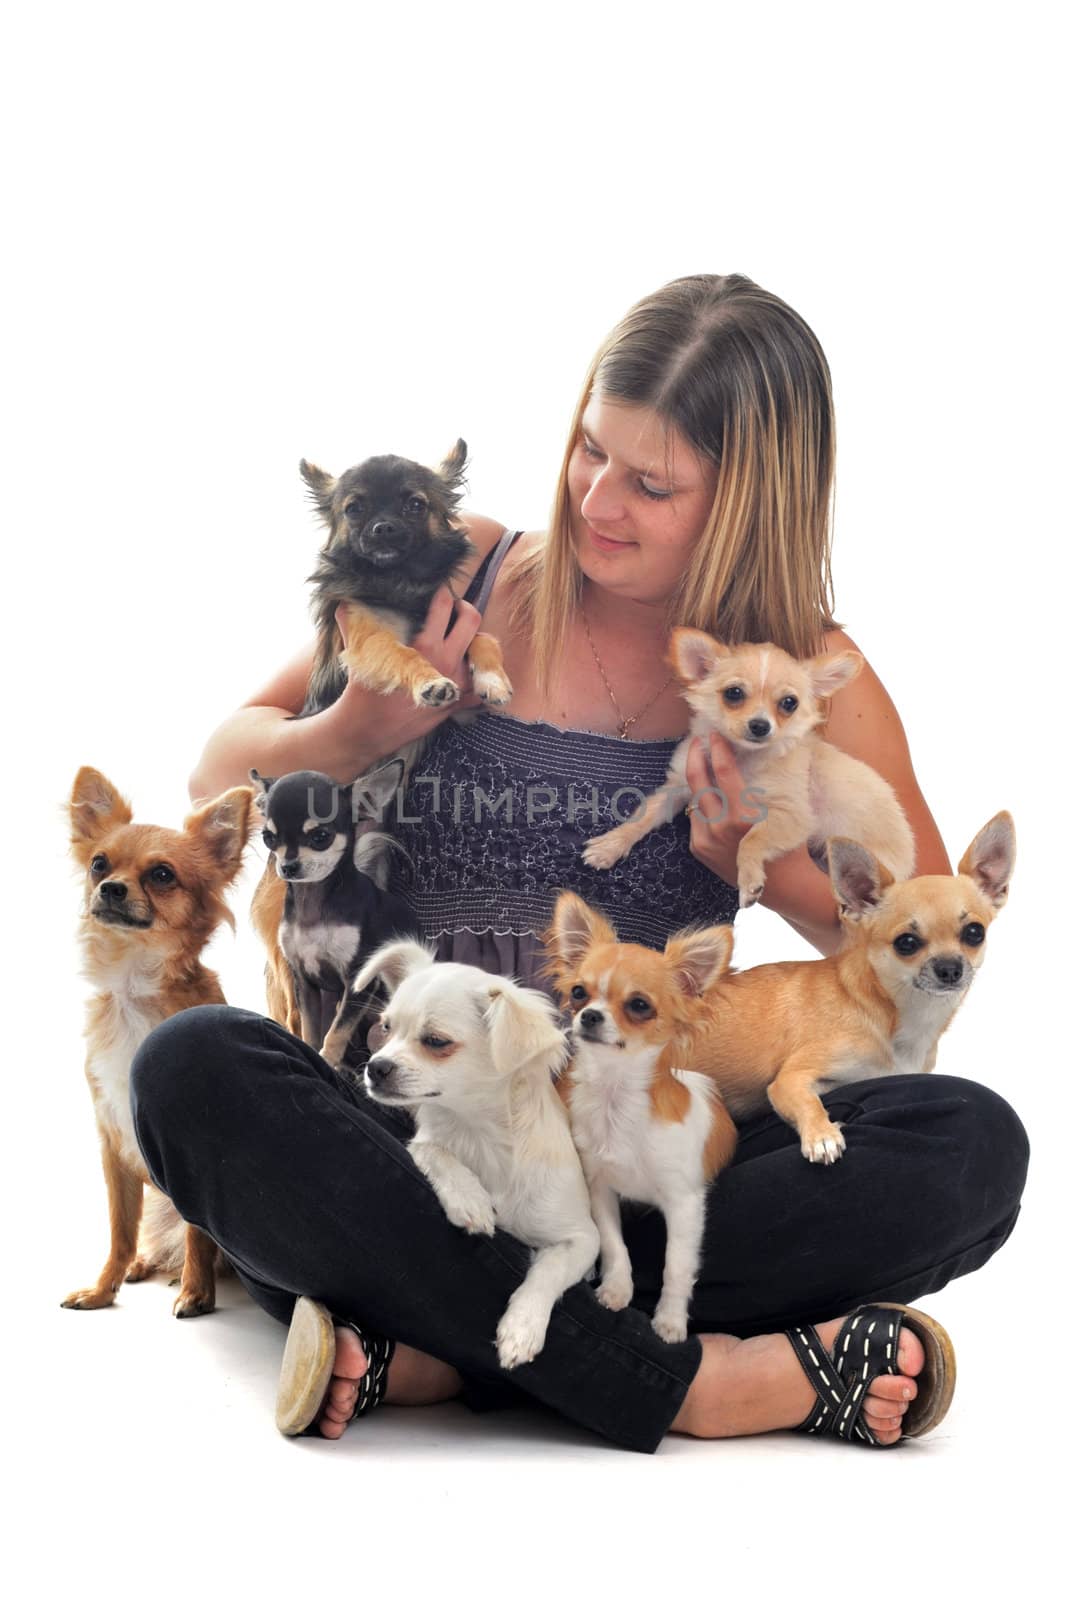 portrait of a woman and seven chihuahuas in front of white background